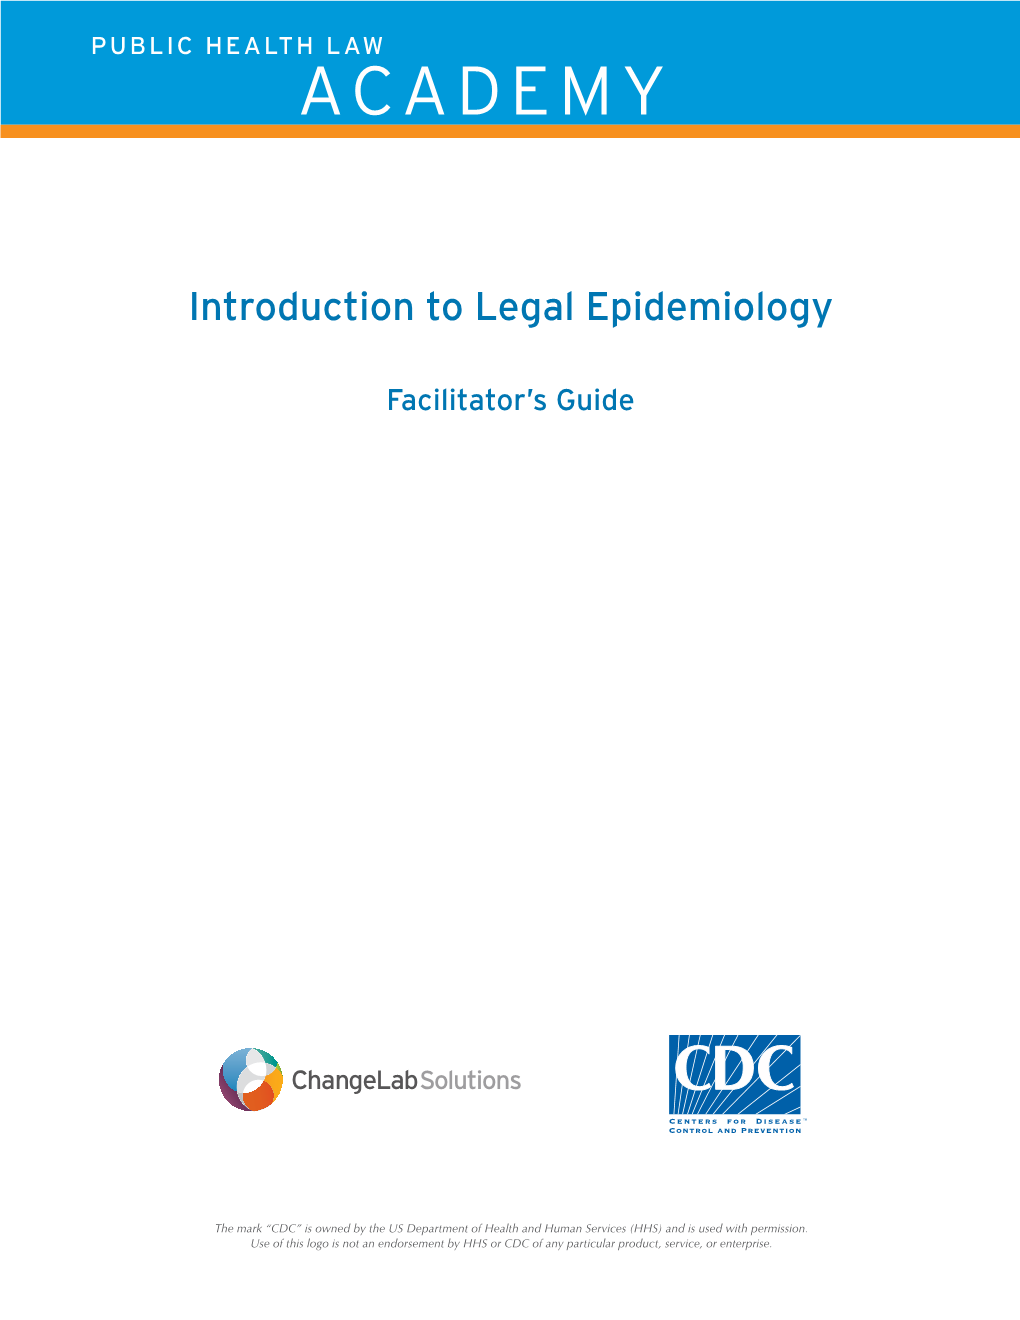 Introduction to Legal Epidemiology Facilitator's Guide